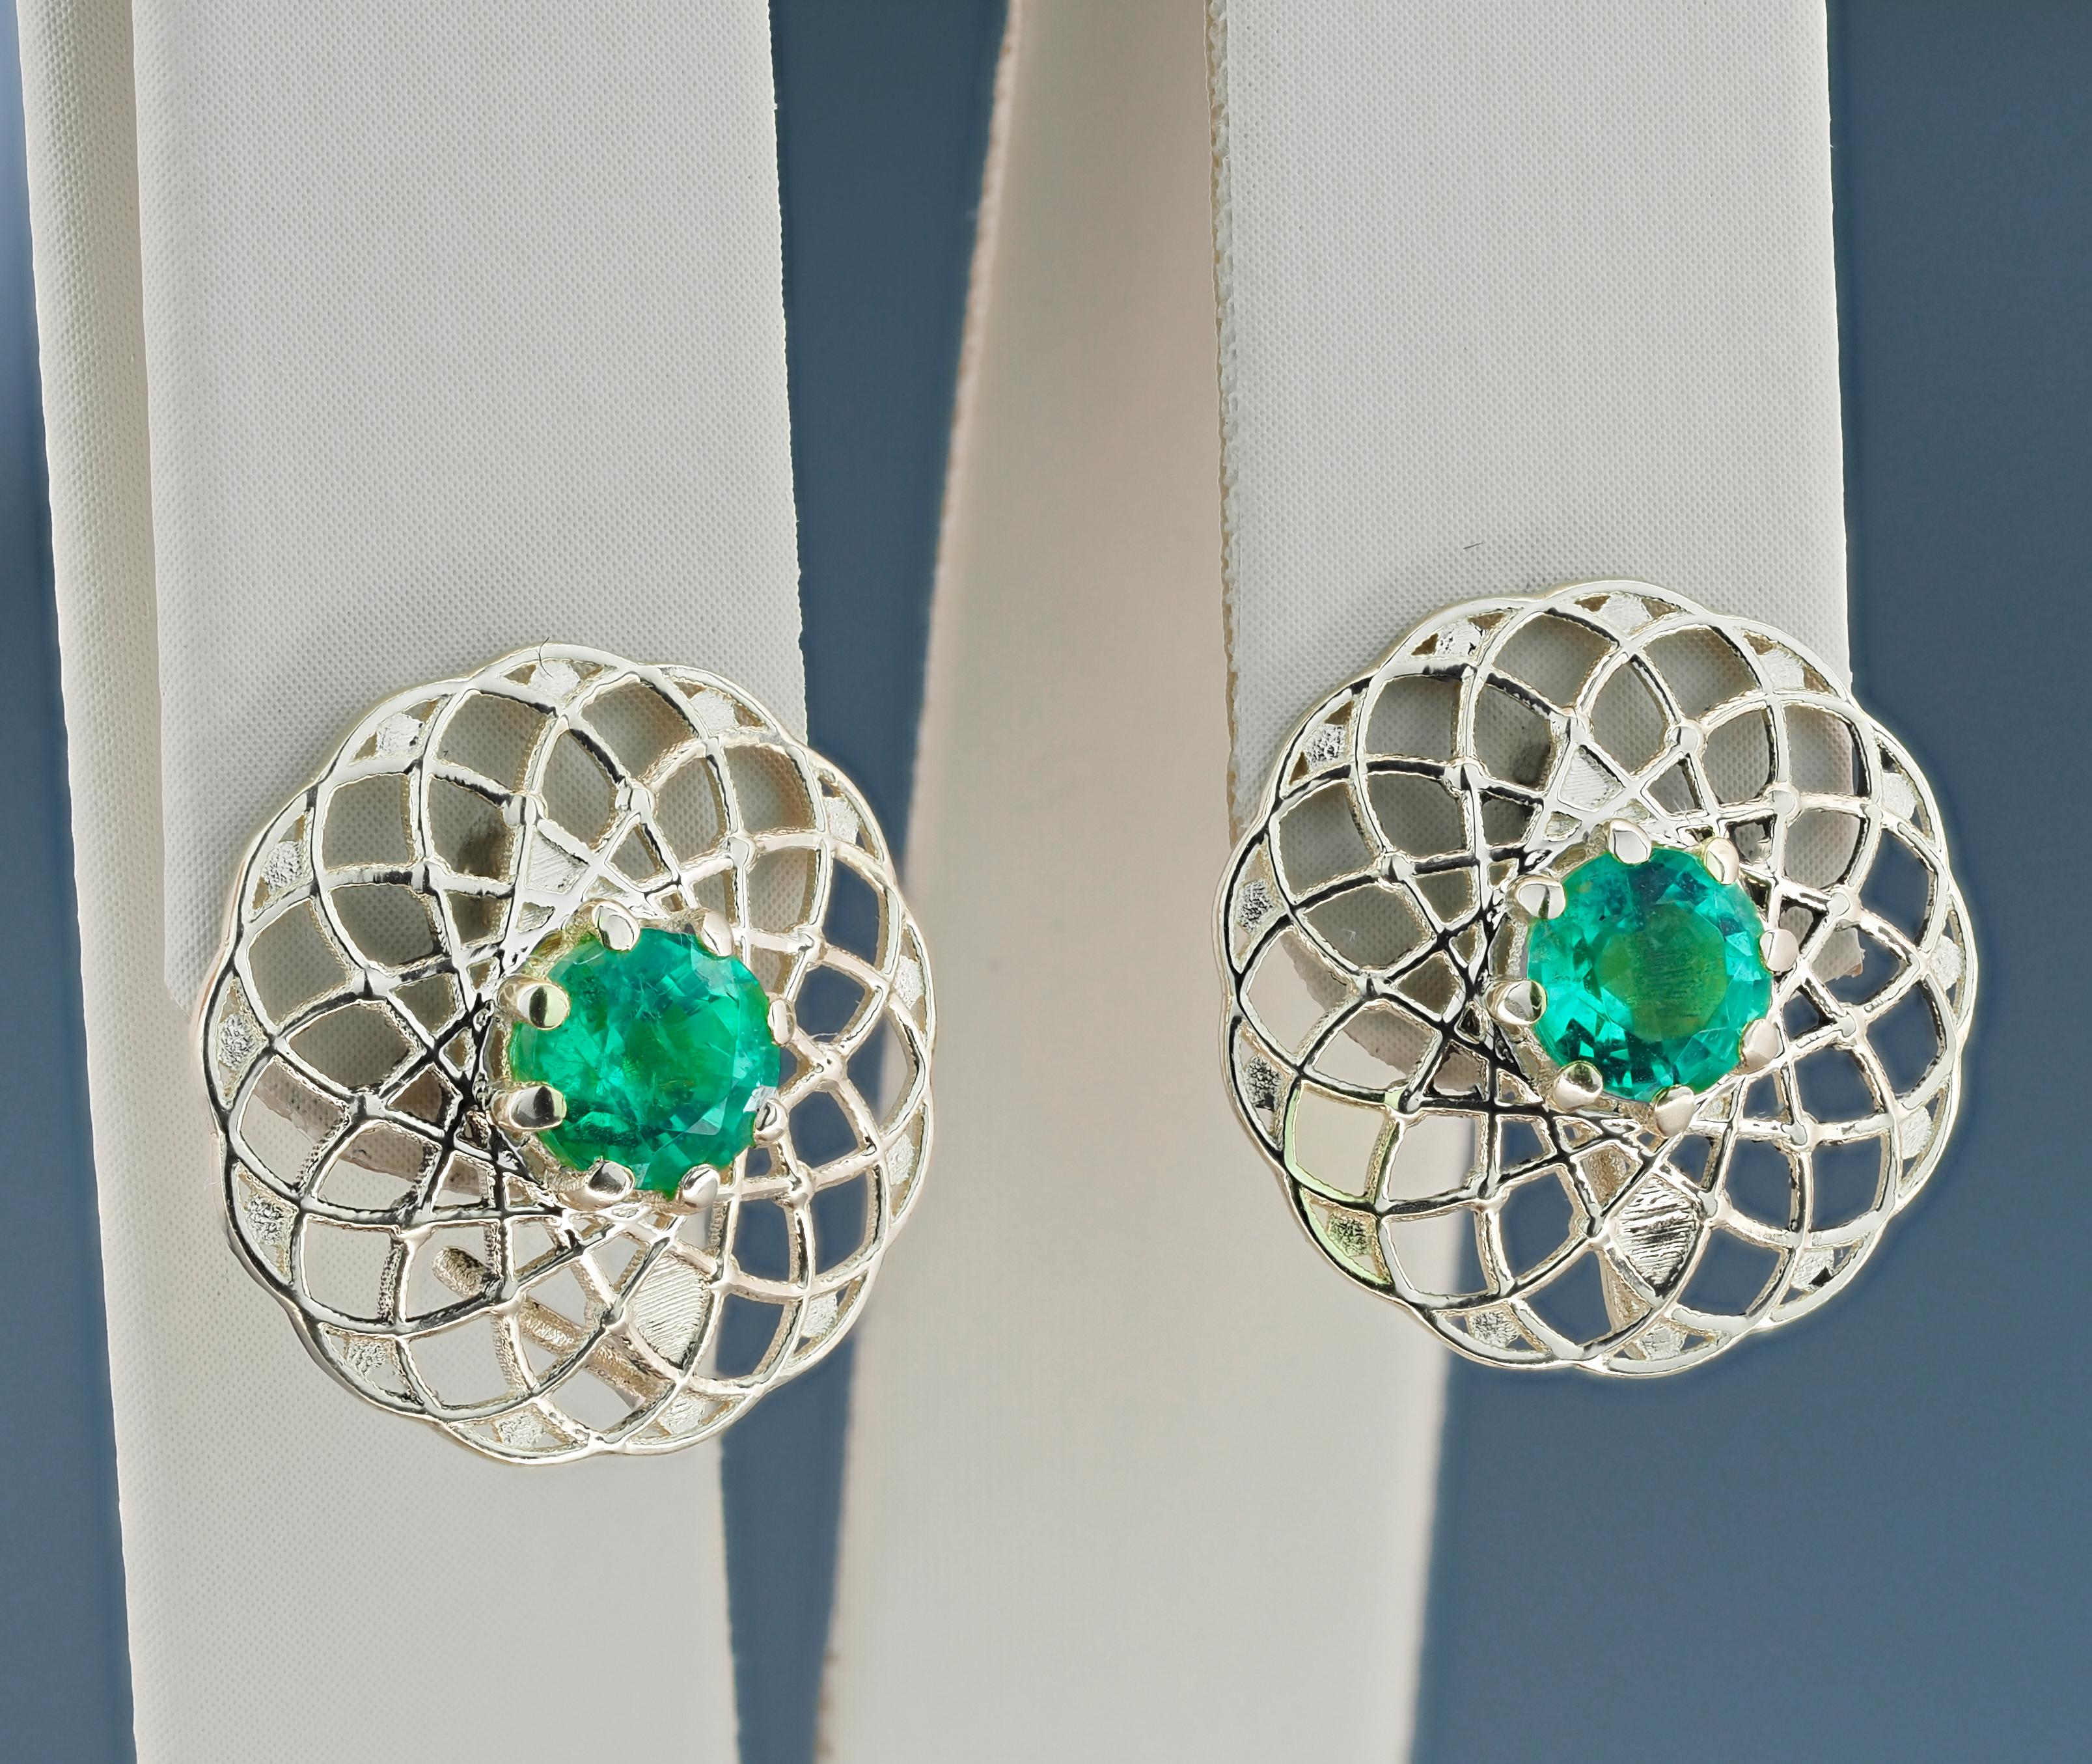 Round Cut Emerald earrings. Gold and Silver Transformable Earrings Studs with Emeralds For Sale